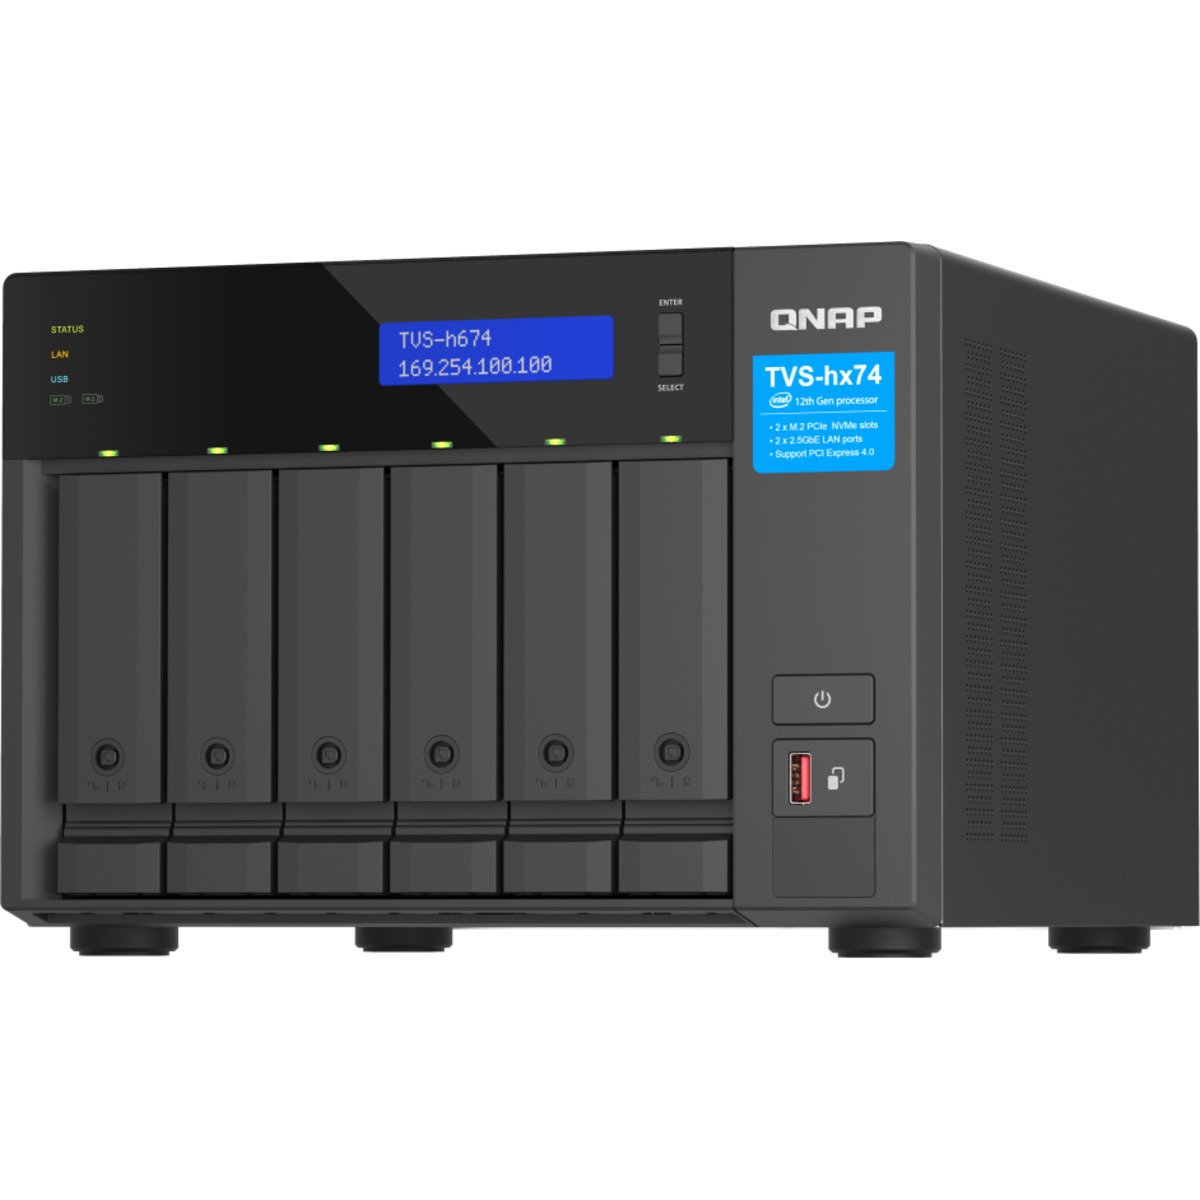 QNAP TVS-h674 Core i5 72tb 6-Bay Desktop Multimedia / Power User / Business NAS - Network Attached Storage Device 4x18tb Western Digital Gold WD181KRYZ 3.5 7200rpm SATA 6Gb/s HDD ENTERPRISE Class Drives Installed - Burn-In Tested TVS-h674 Core i5